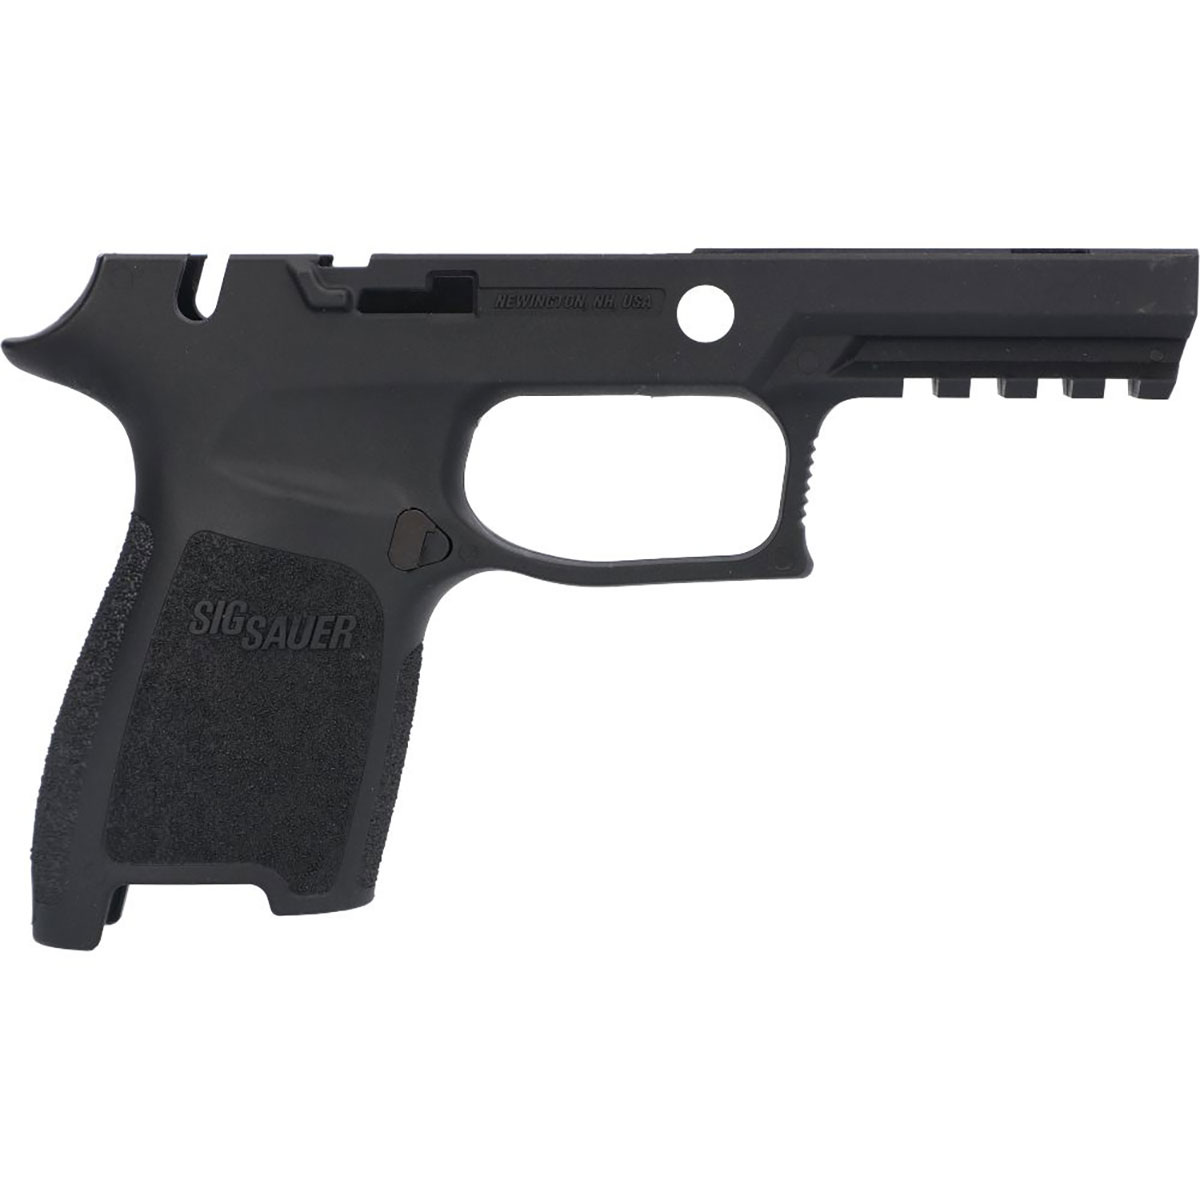 SIG SAUER, INC. - GRIP MODULE W/MANUAL SAFETY FOR SIG SAUER® P320 COMPACT